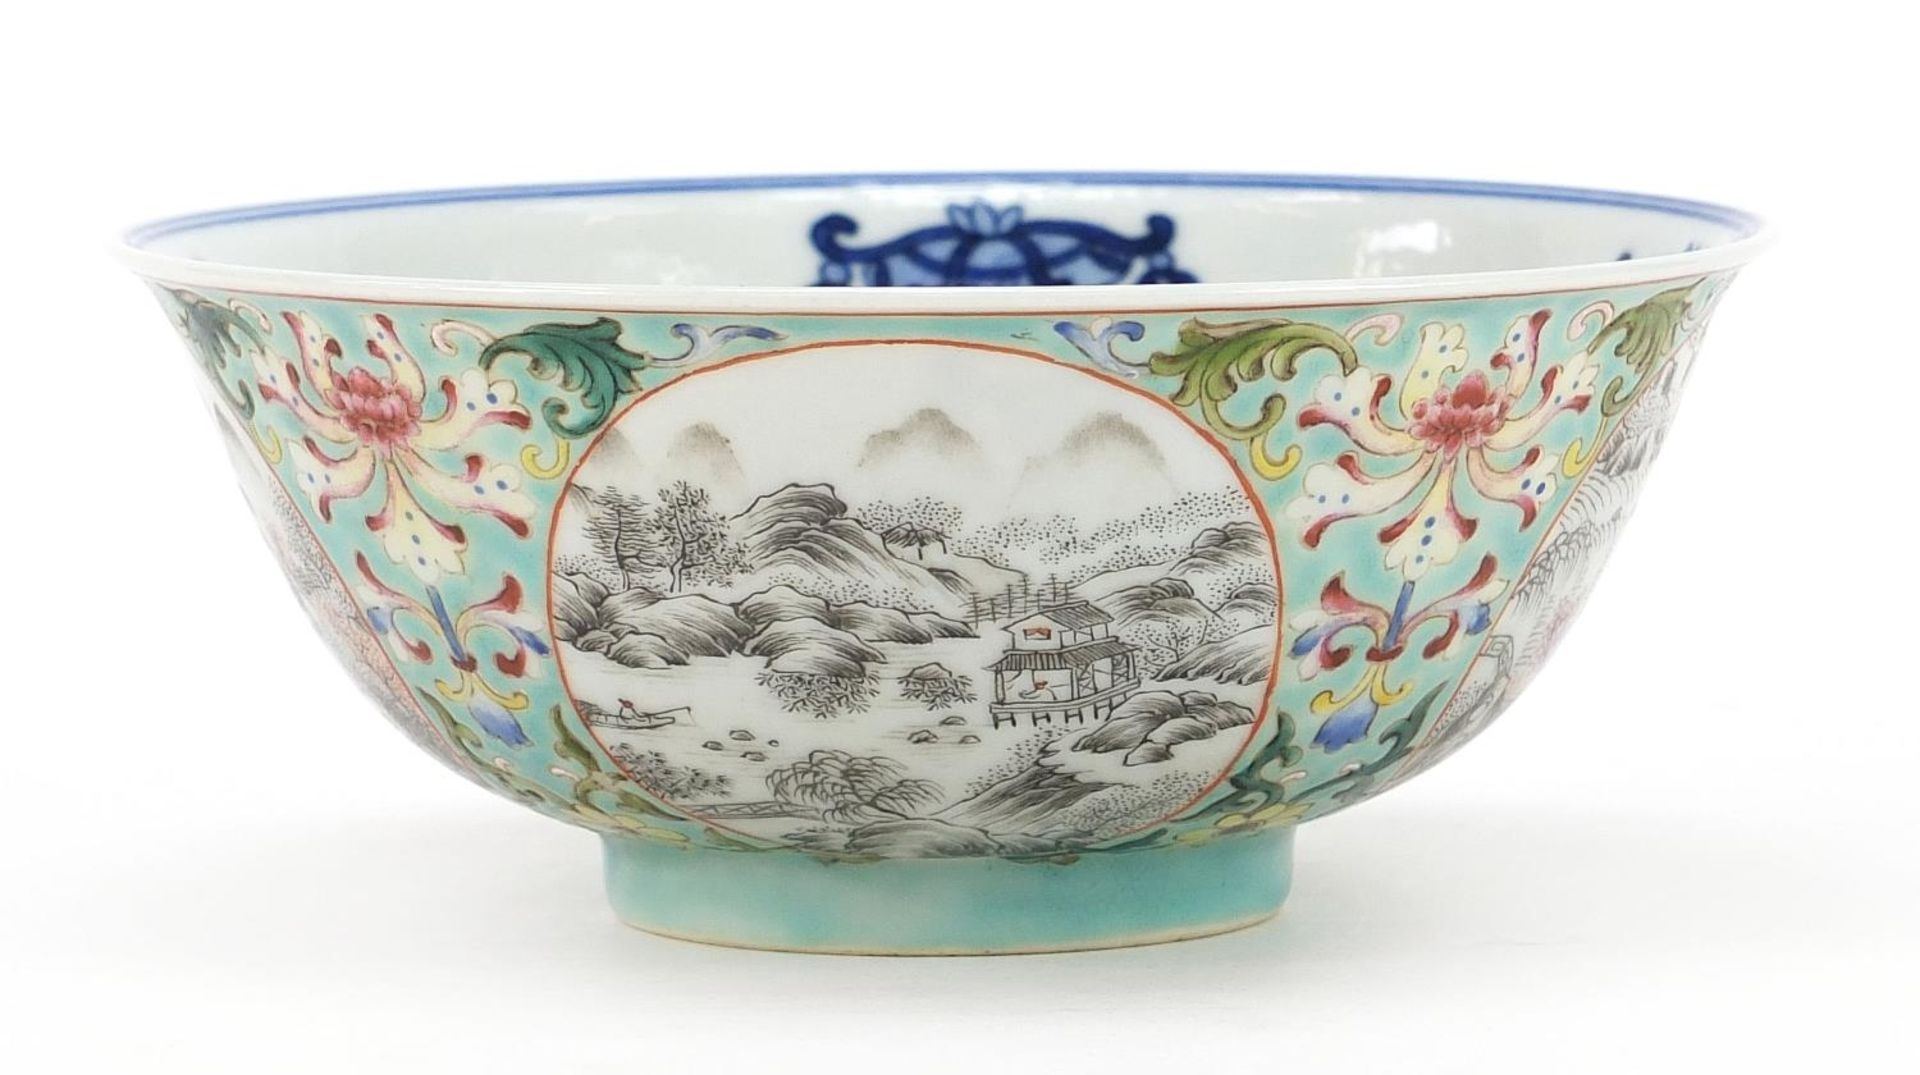 Chinese blue and white porcelain bowl with en grisaille landscape panels, hand painted in the - Image 4 of 8